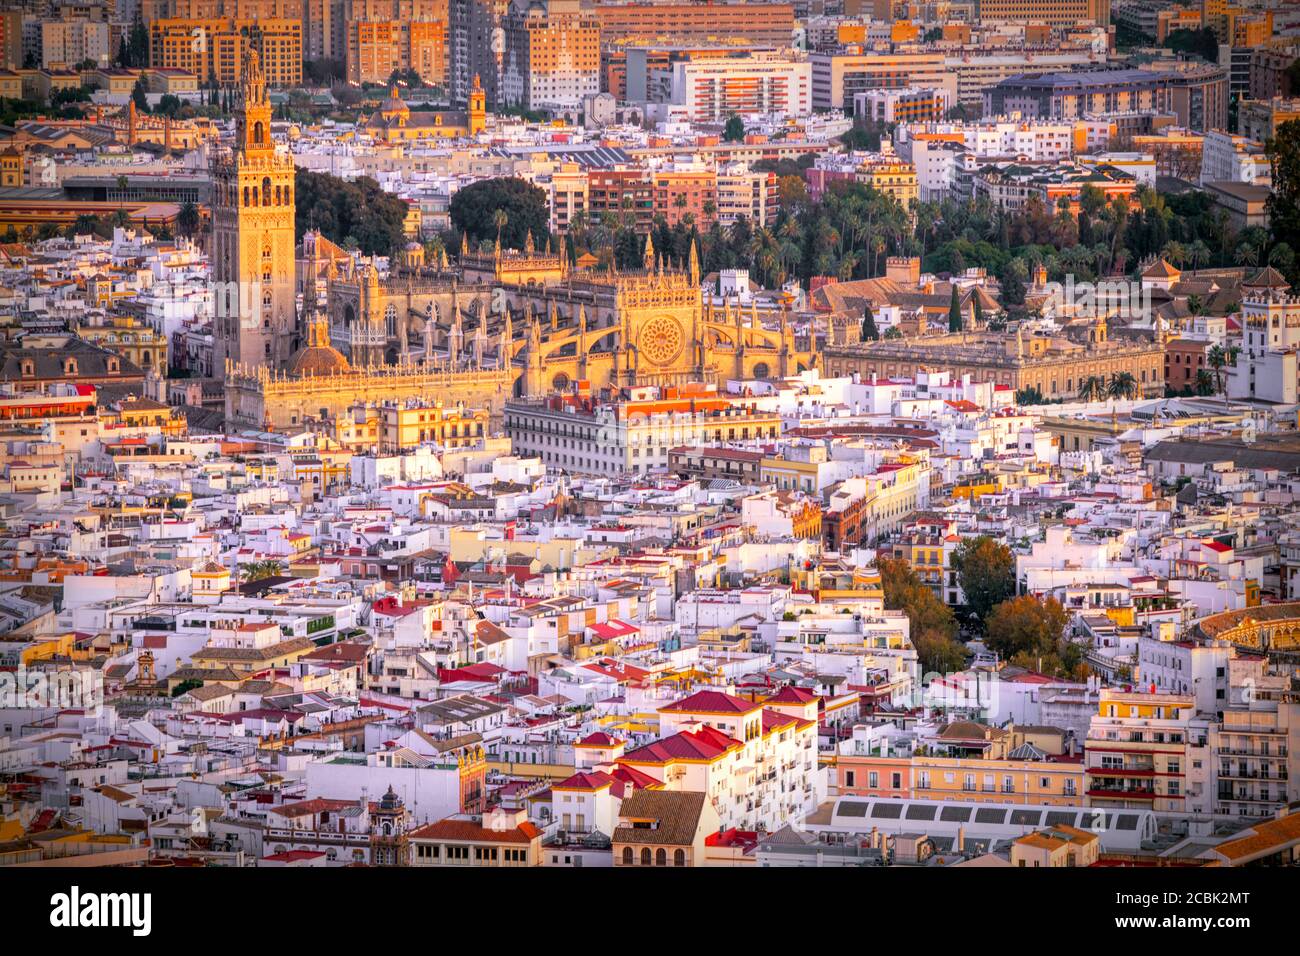 Aerial view of Seville downtown, with the Giralda tower, the Cathedral and the Archivo de Indias building, among other landmarks, Spain. Stock Photo